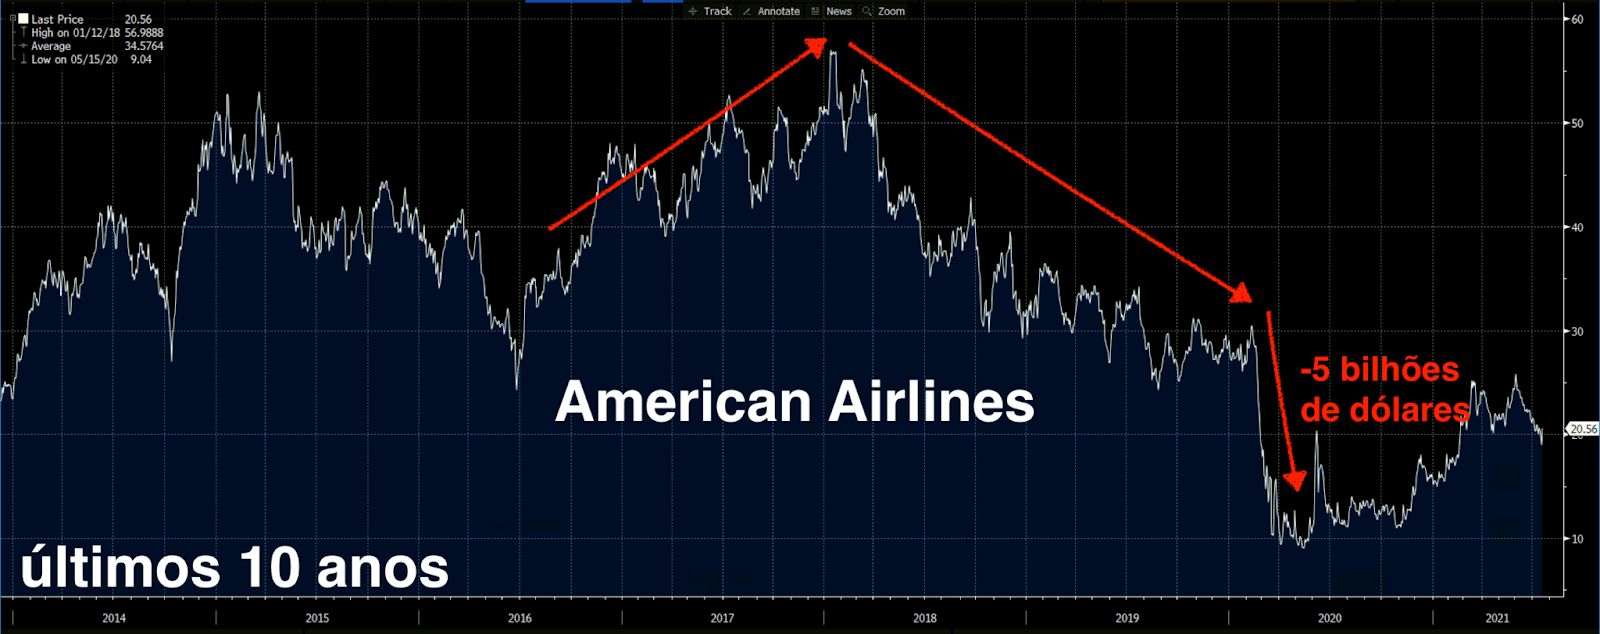 American Airlines (Fonte: Bloomberg)